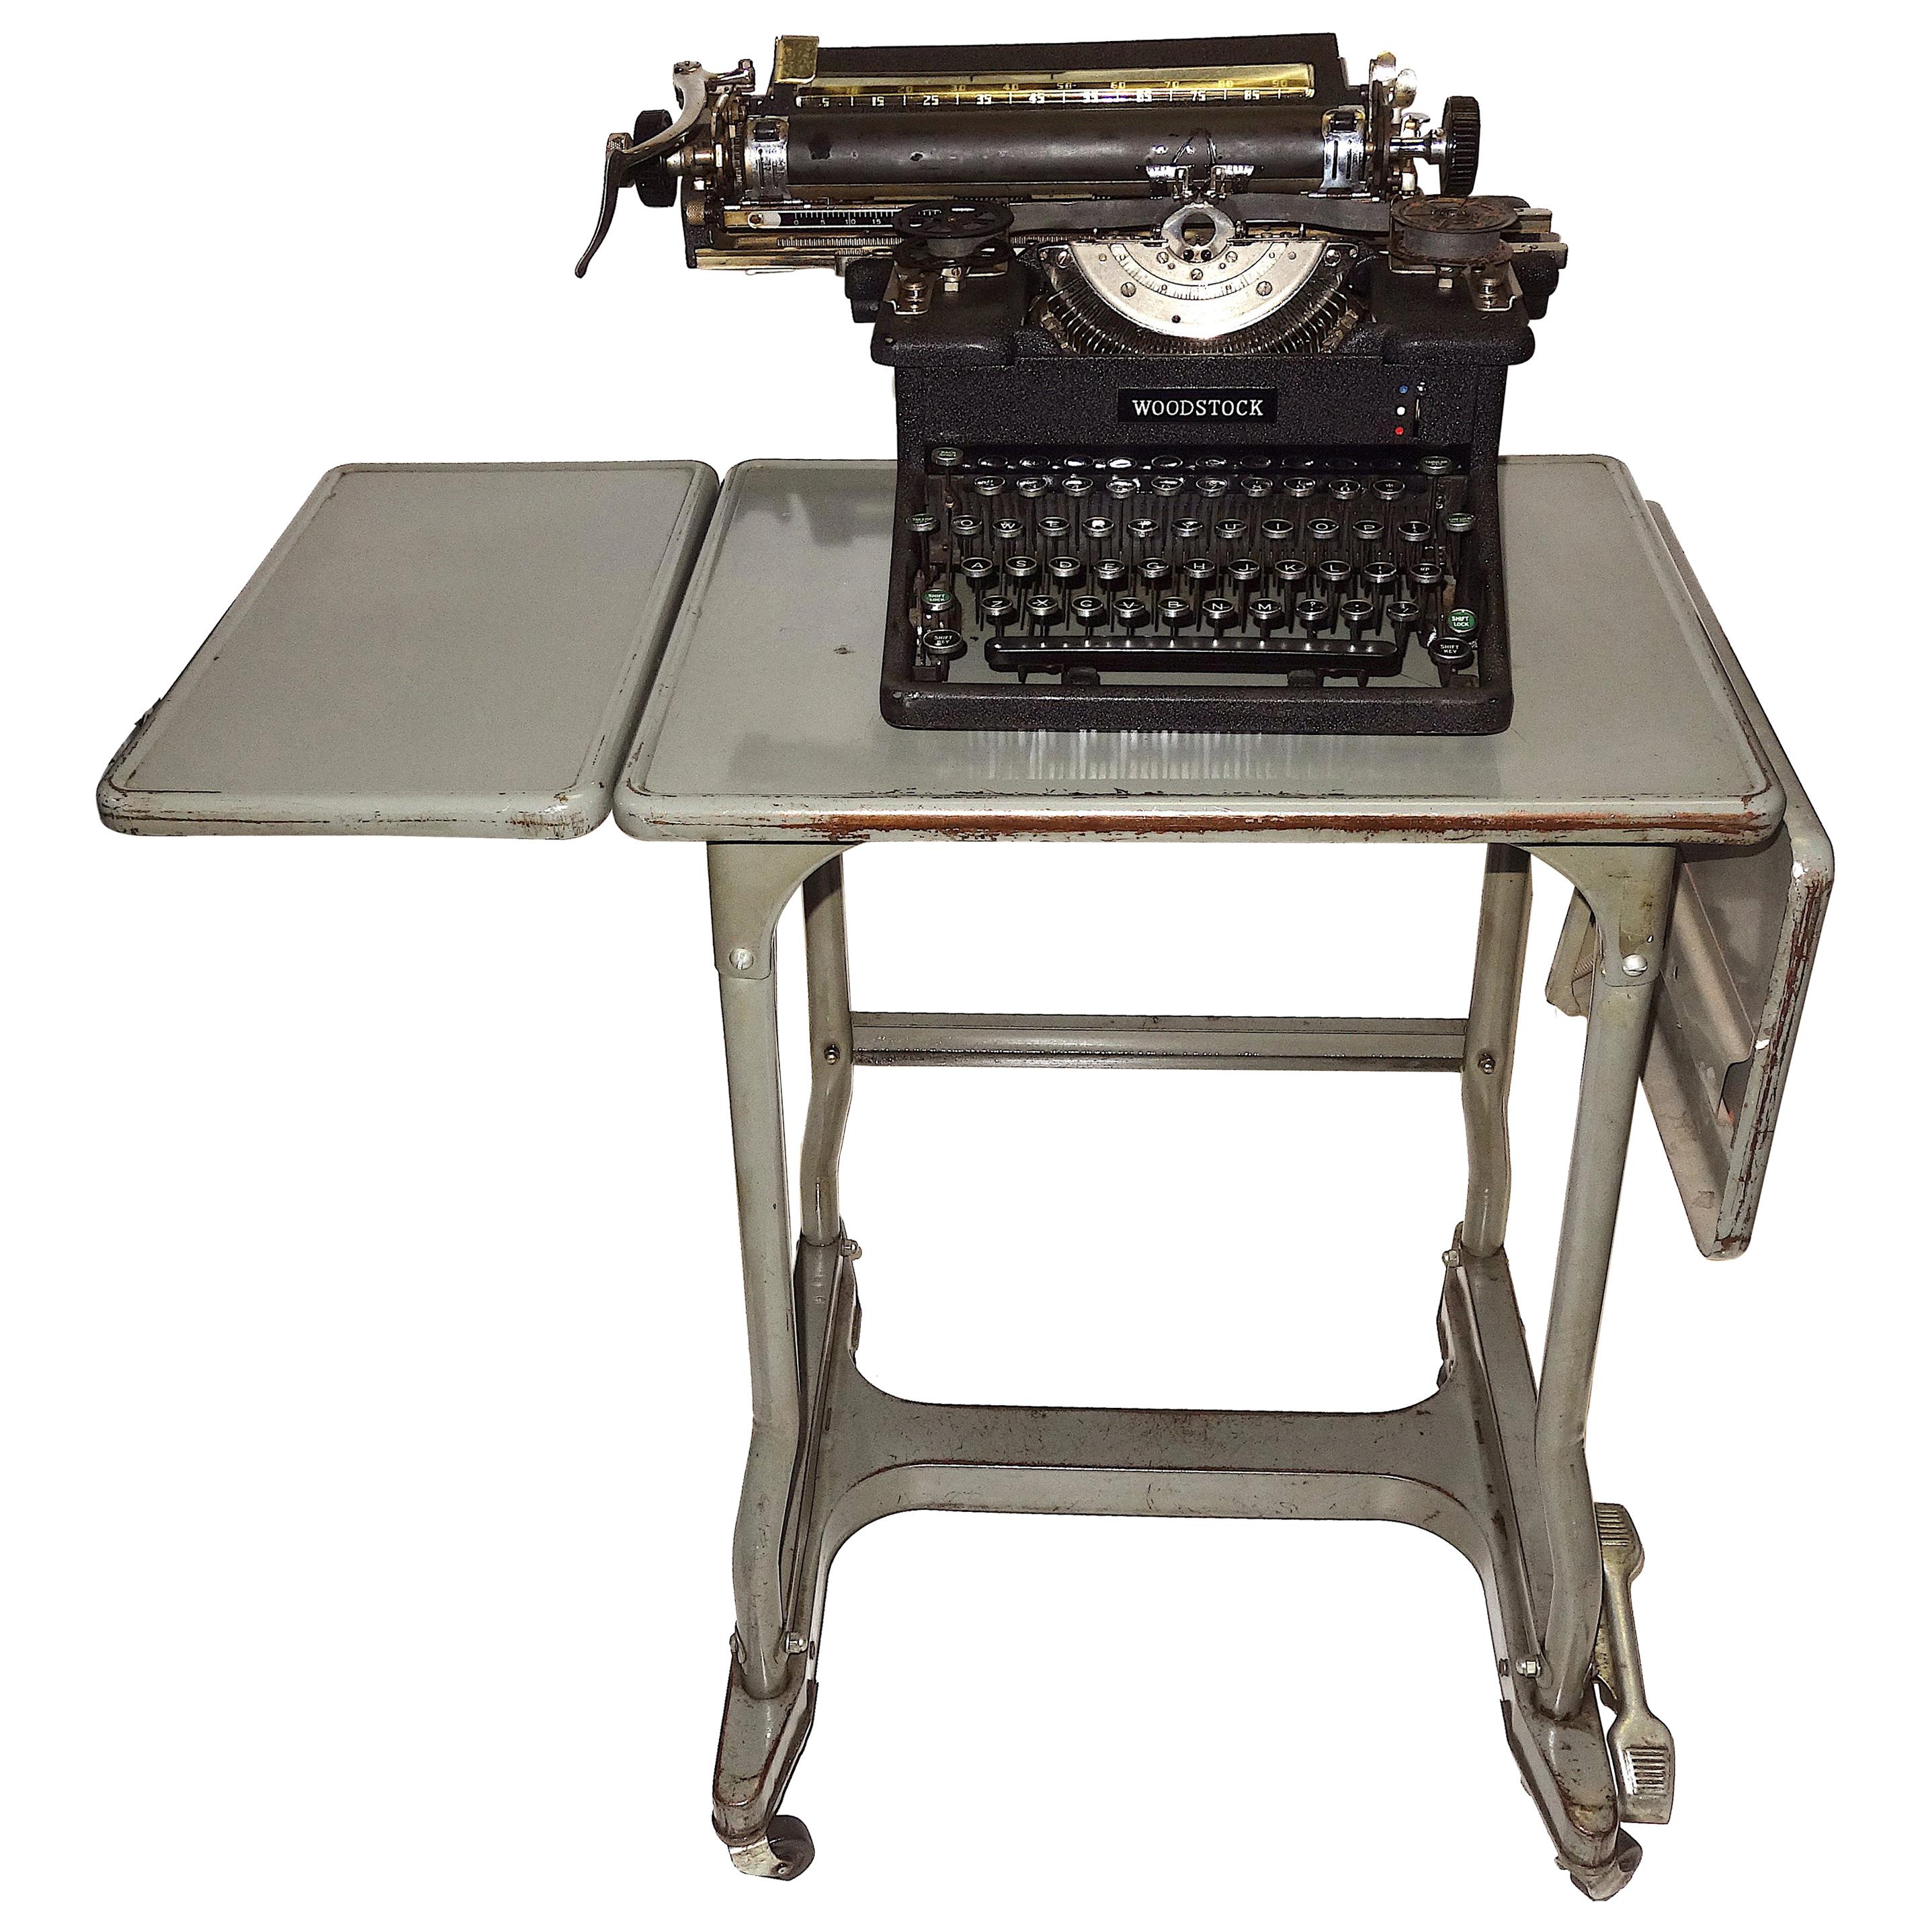 Offered for your consideration is this iconic, working, circa 1920s woodstock vintage typewriter displayed on a vintage steel typewriter drop-leaf rolling table.
Woodstock was based near Chicago and started out as the Emerson Brand, then the